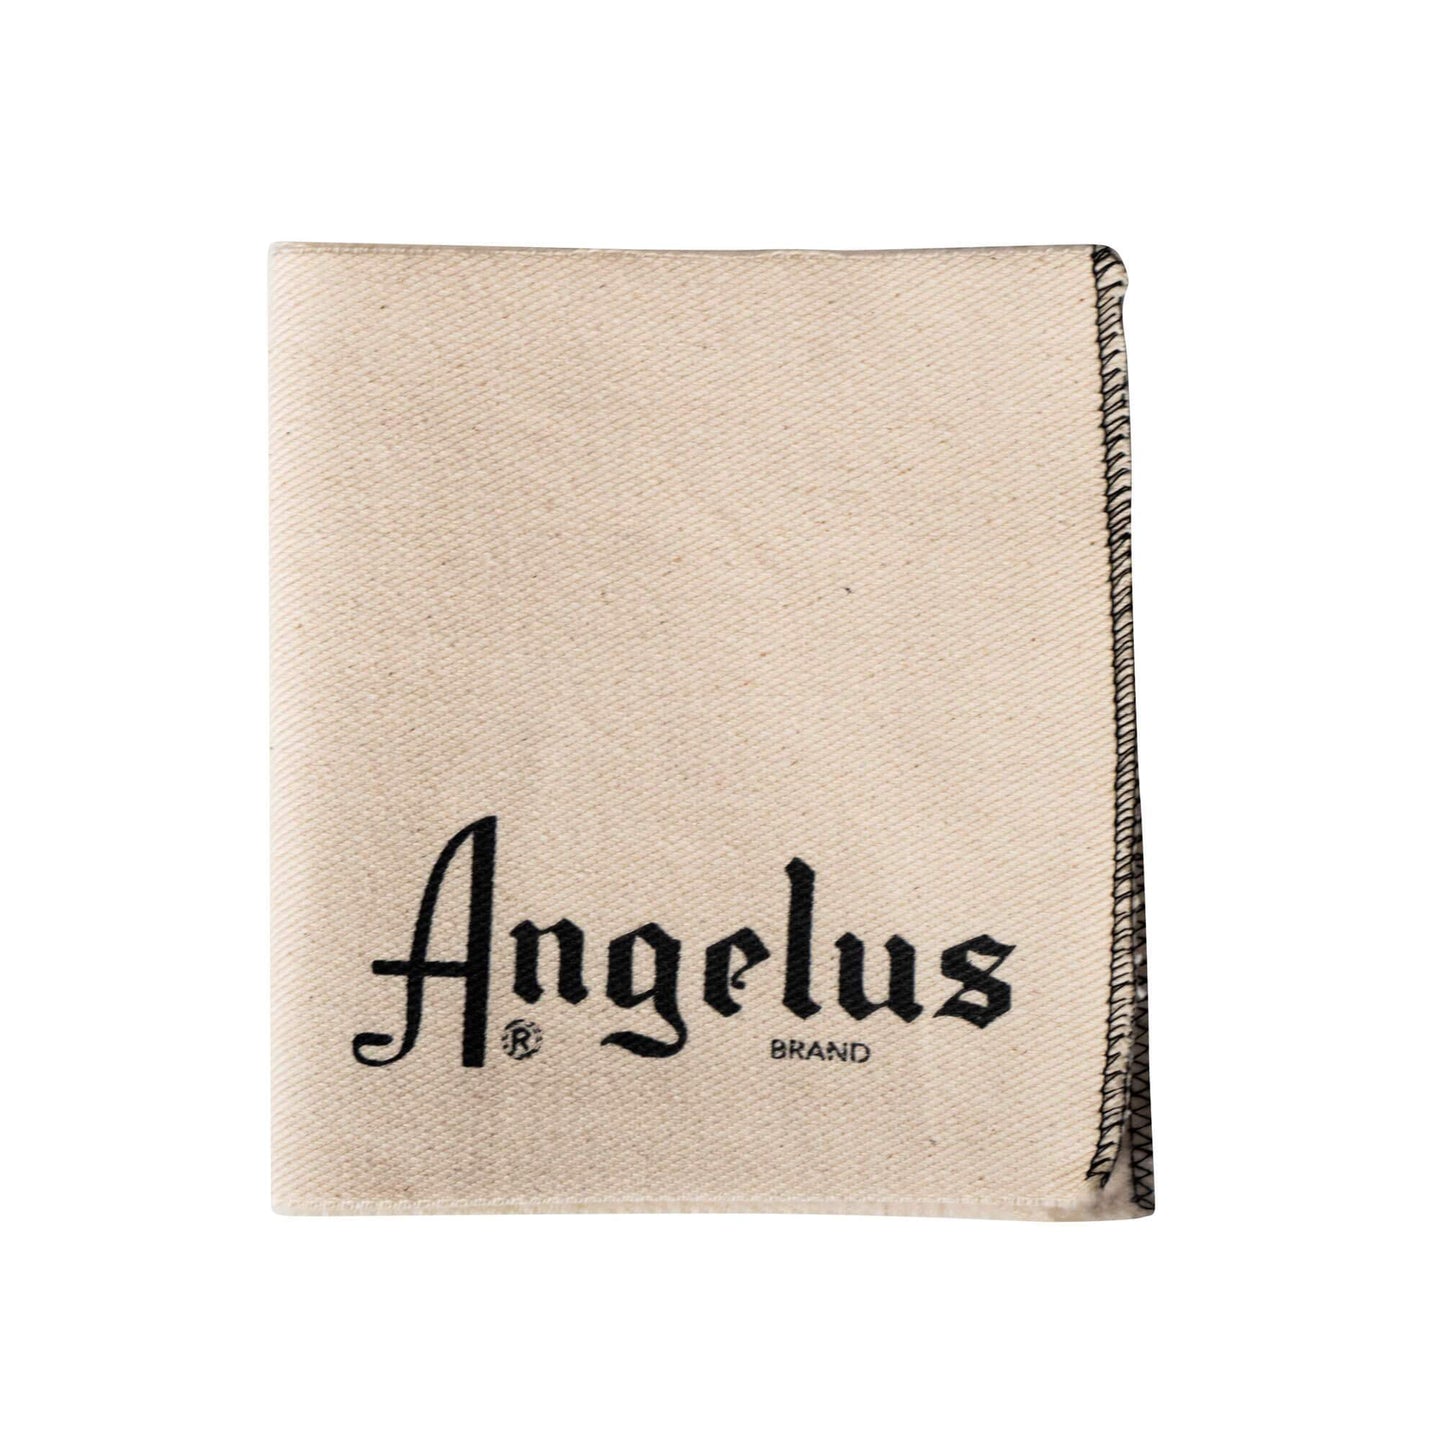 Angelus Brushes and more